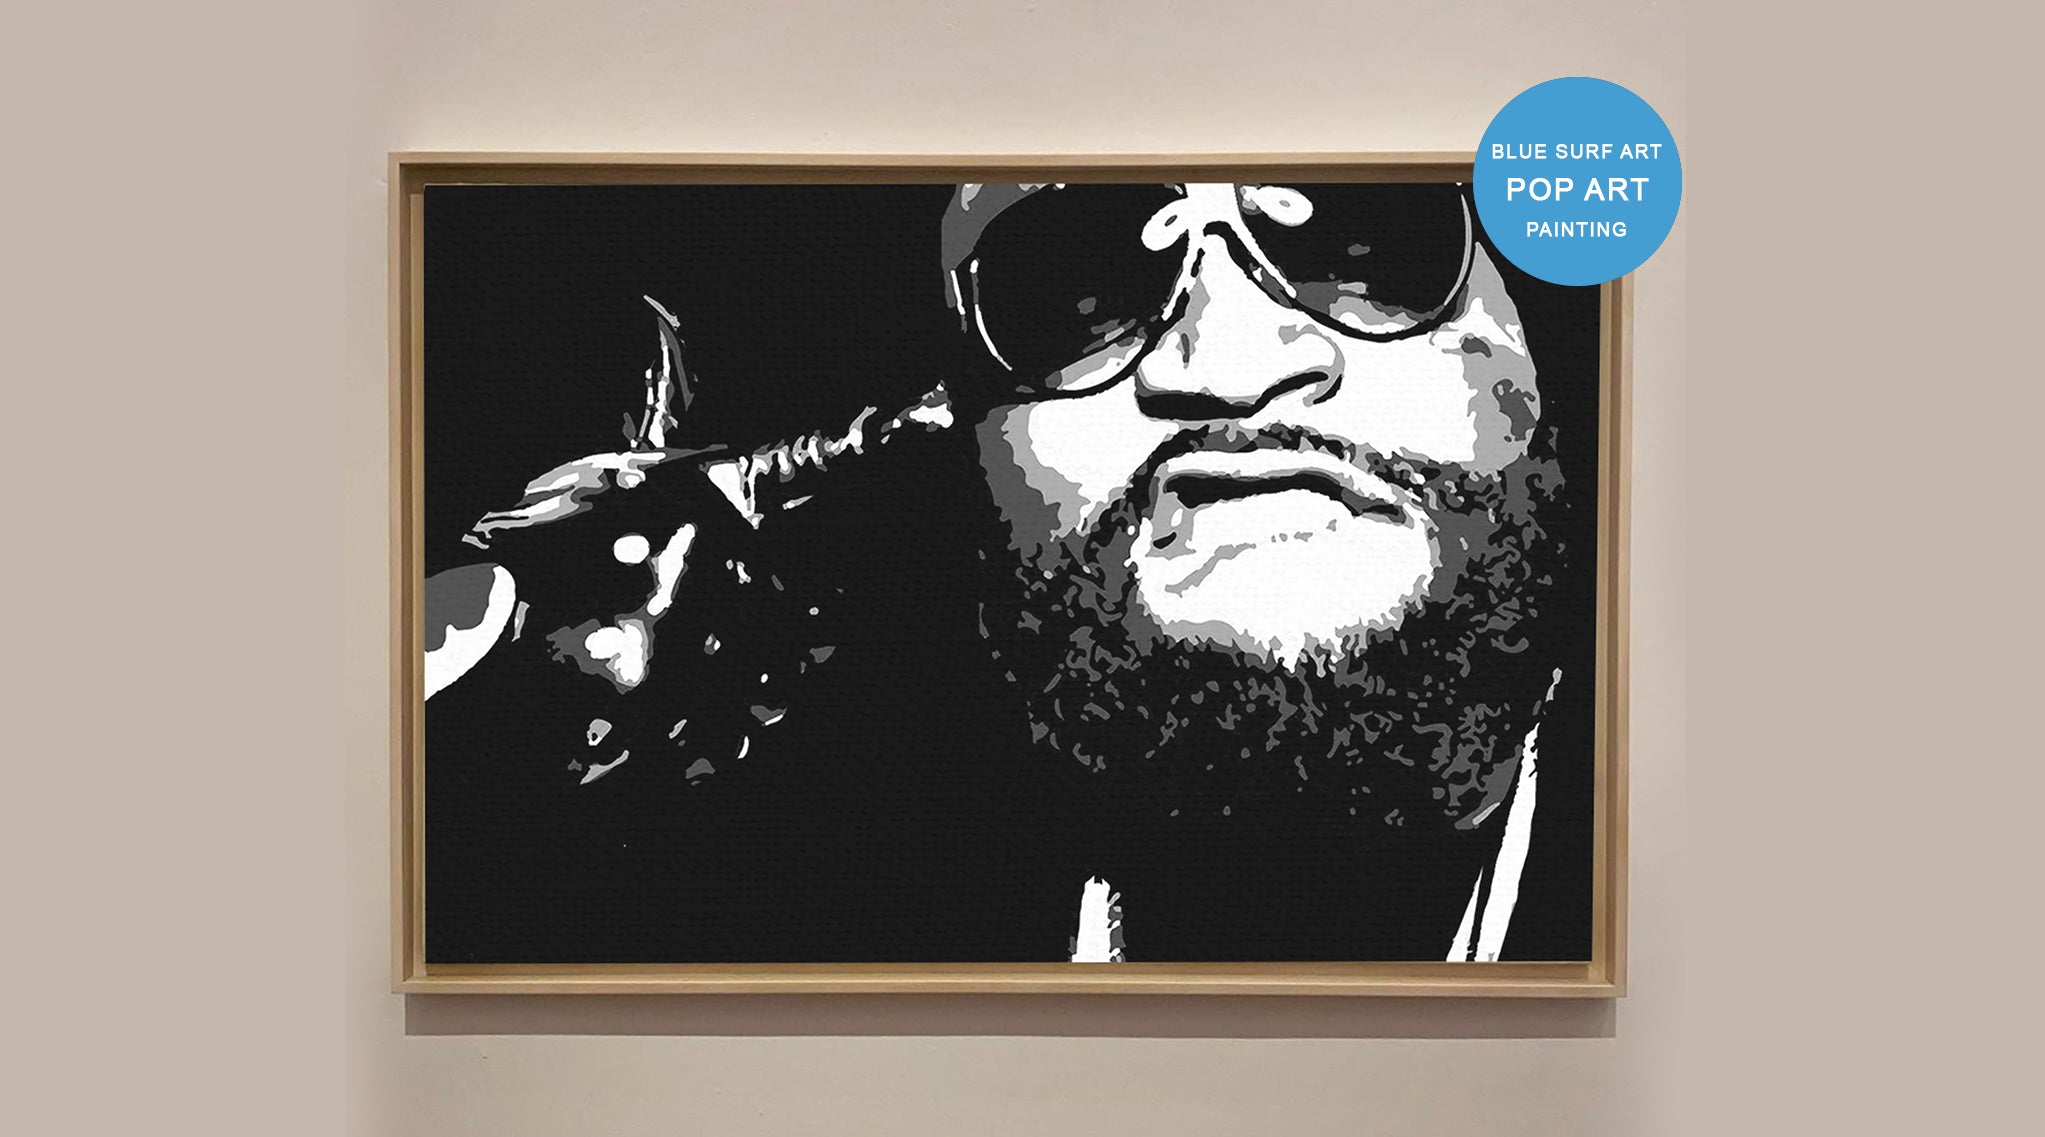 Completion of the Rick Ross Pop art painting 